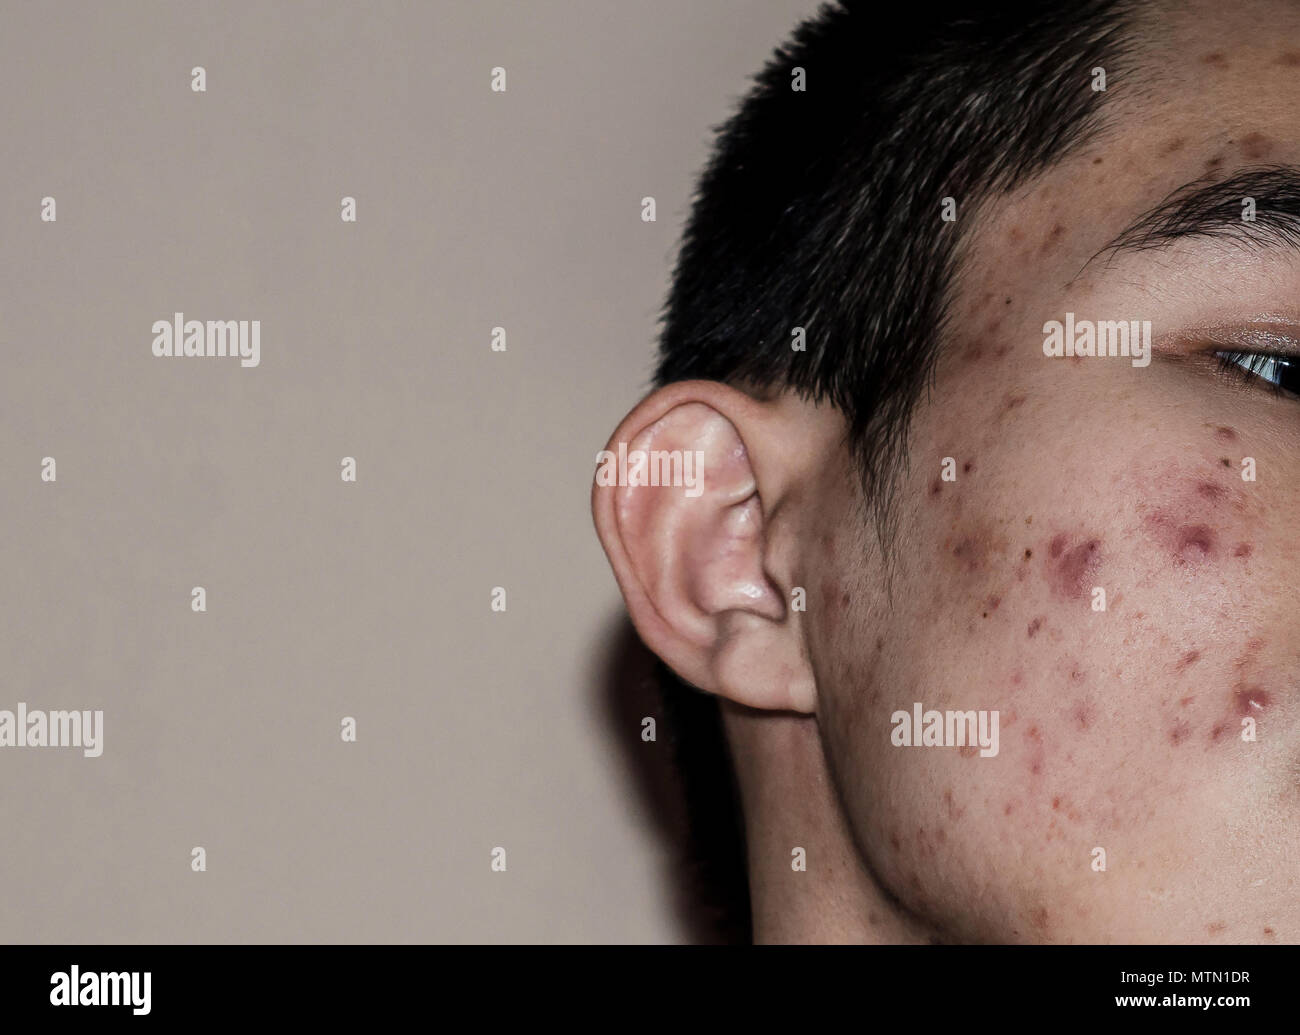 Close-up of acne on the skin, Acne on the face caused by Hormone, The scars, wrinkle and acne inflammation on the face skin Stock Photo